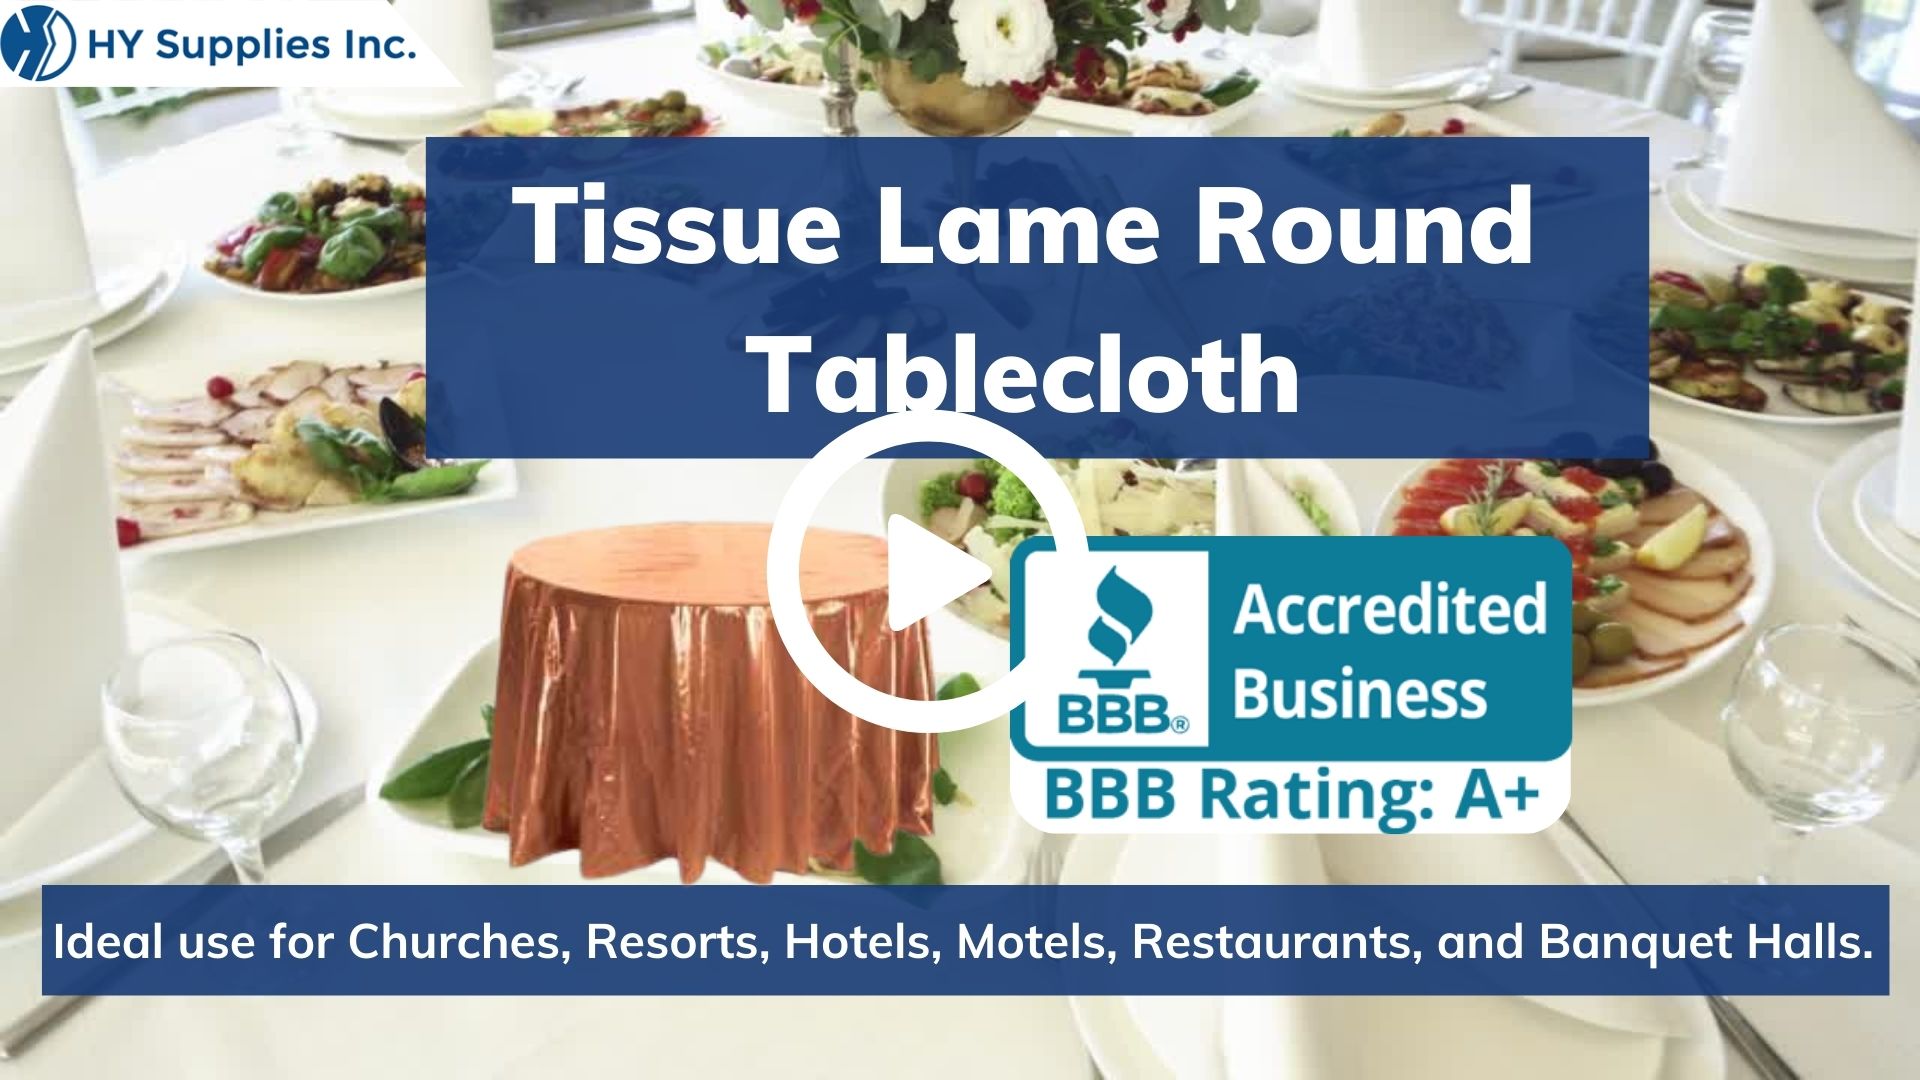 Tissue Lame Round Tablecloth